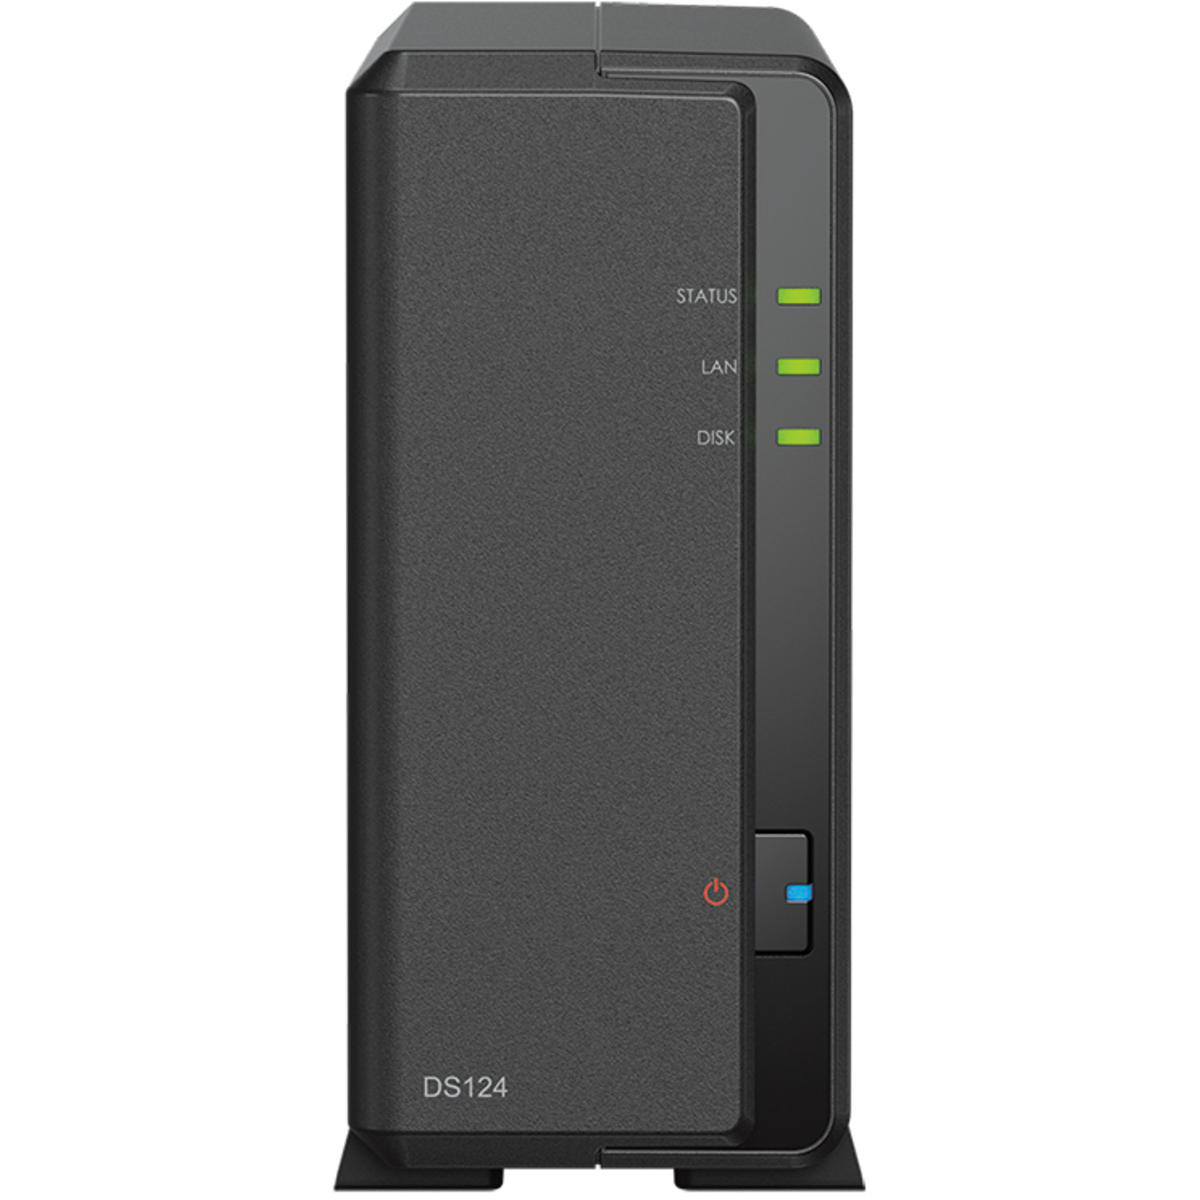 buy $548 Synology DiskStation DS124 16tb Desktop NAS - Network Attached Storage Device 1x16000gb Toshiba Enterprise Capacity MG08ACA16TE 3.5 7200rpm SATA 6Gb/s HDD ENTERPRISE Class Drives Installed - Burn-In Tested - nas headquarters buy network attached storage server device das new raid-5 free shipping simply usa DiskStation DS124